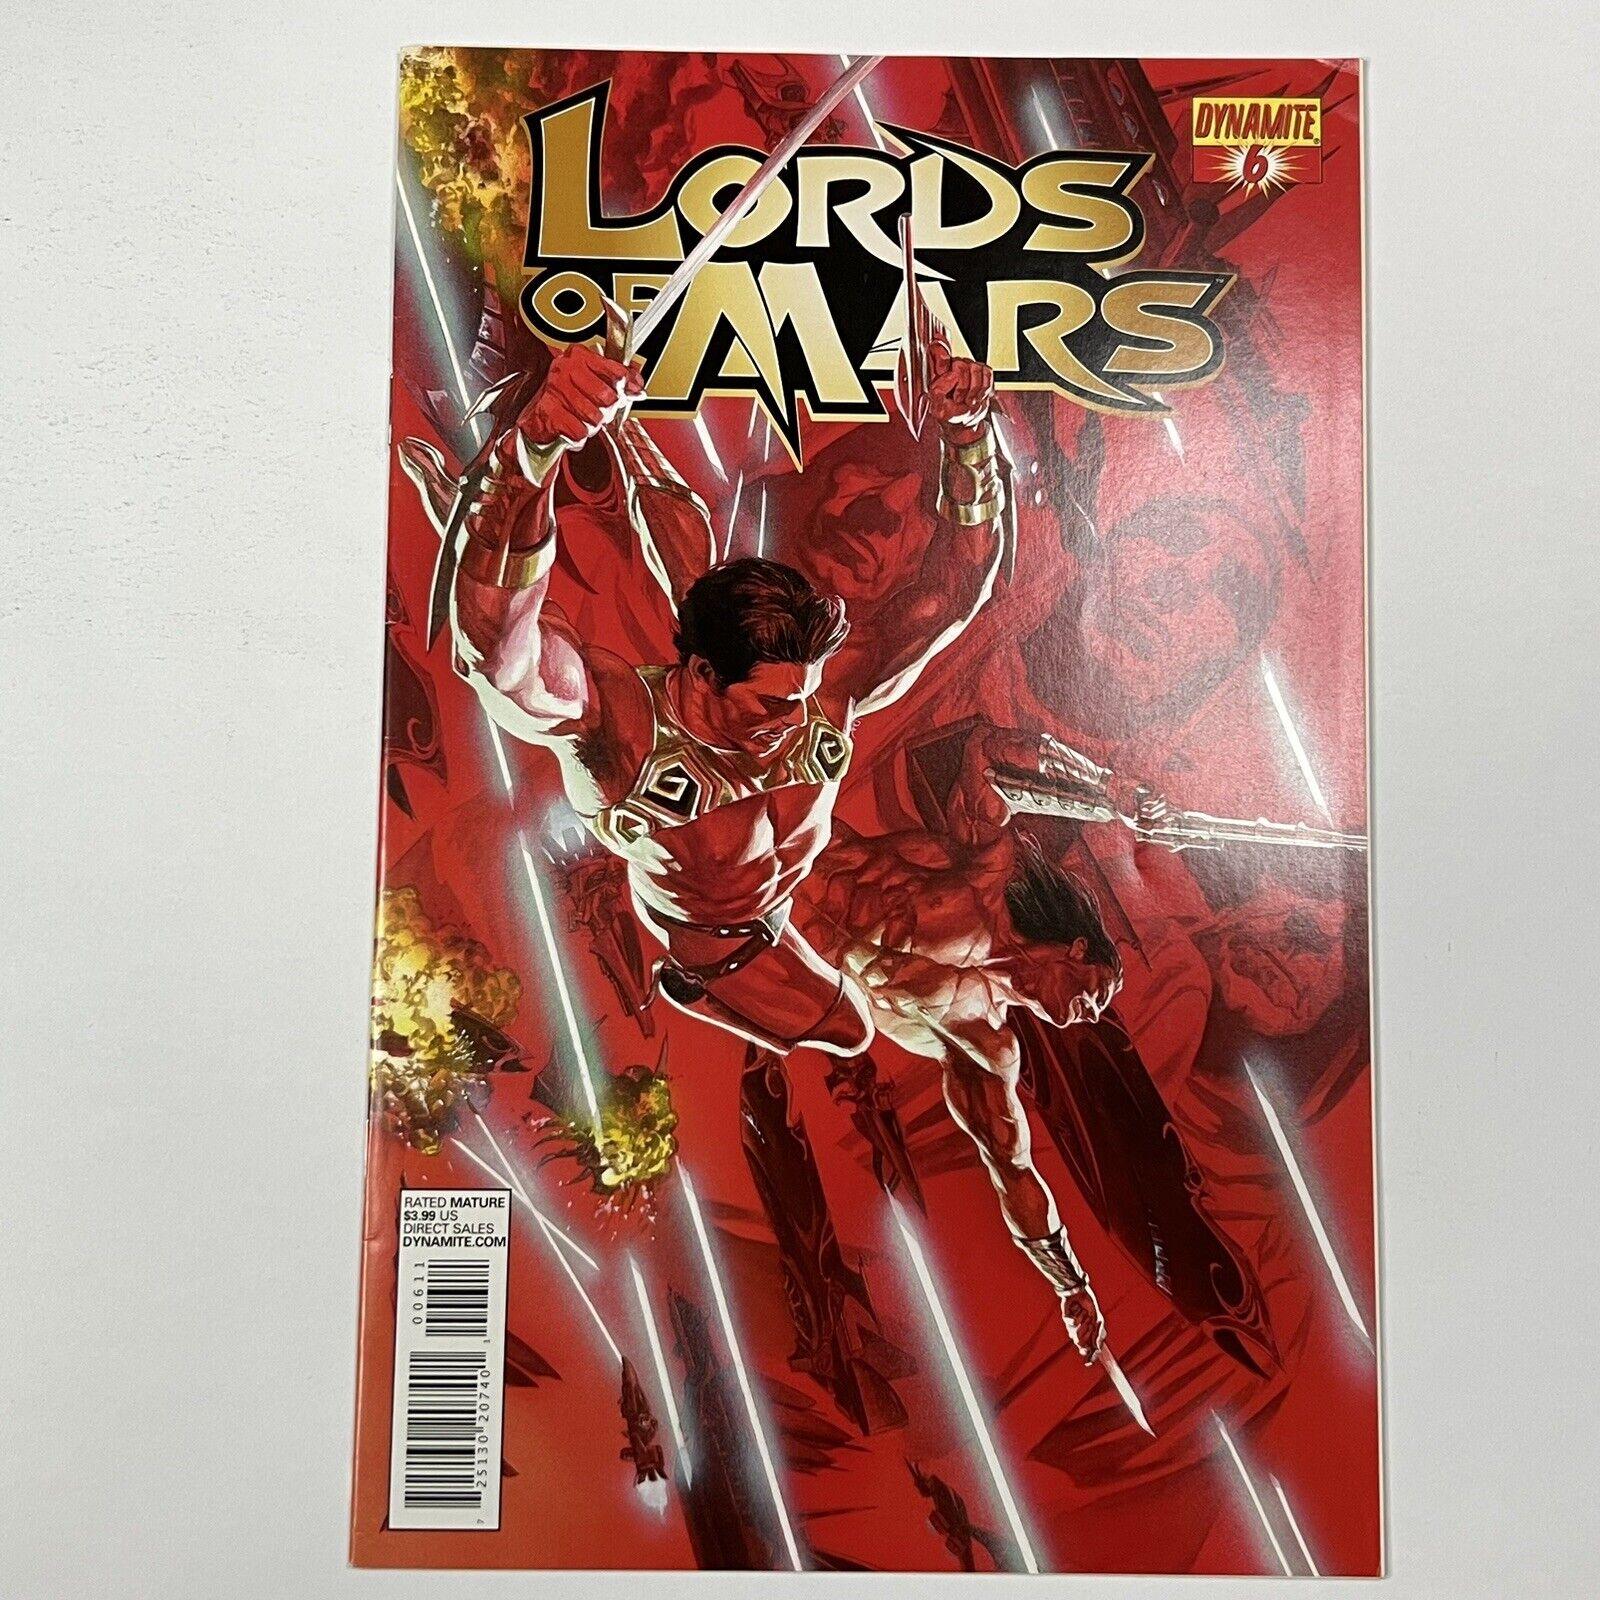 Lords of Mars #6 (of 6) Ross Cover Comic Book 2014 - Dynamite 